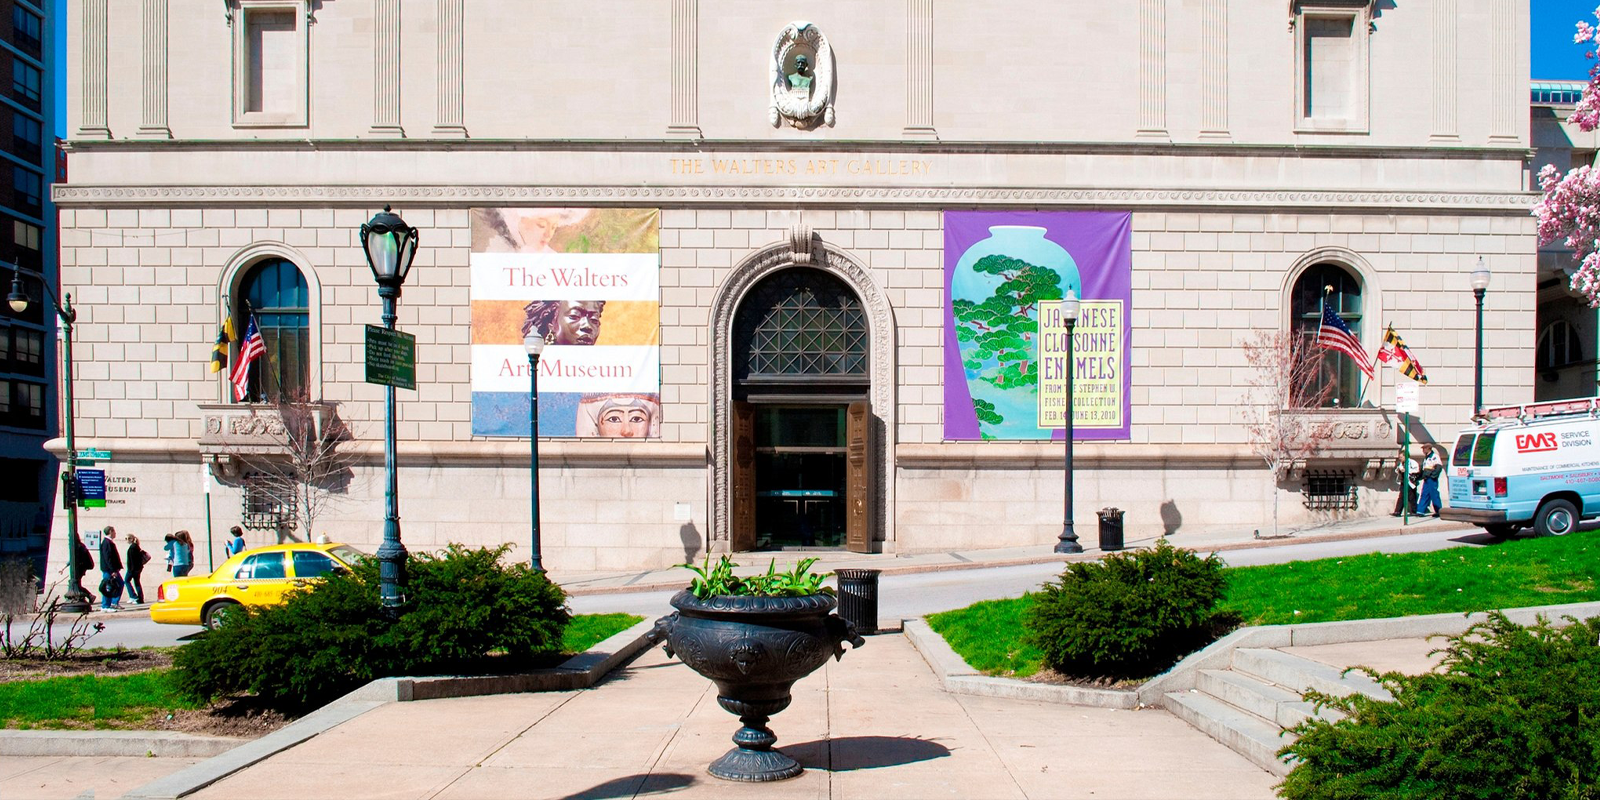 Legislation would give Walters Art Museum employees collective bargaining rights